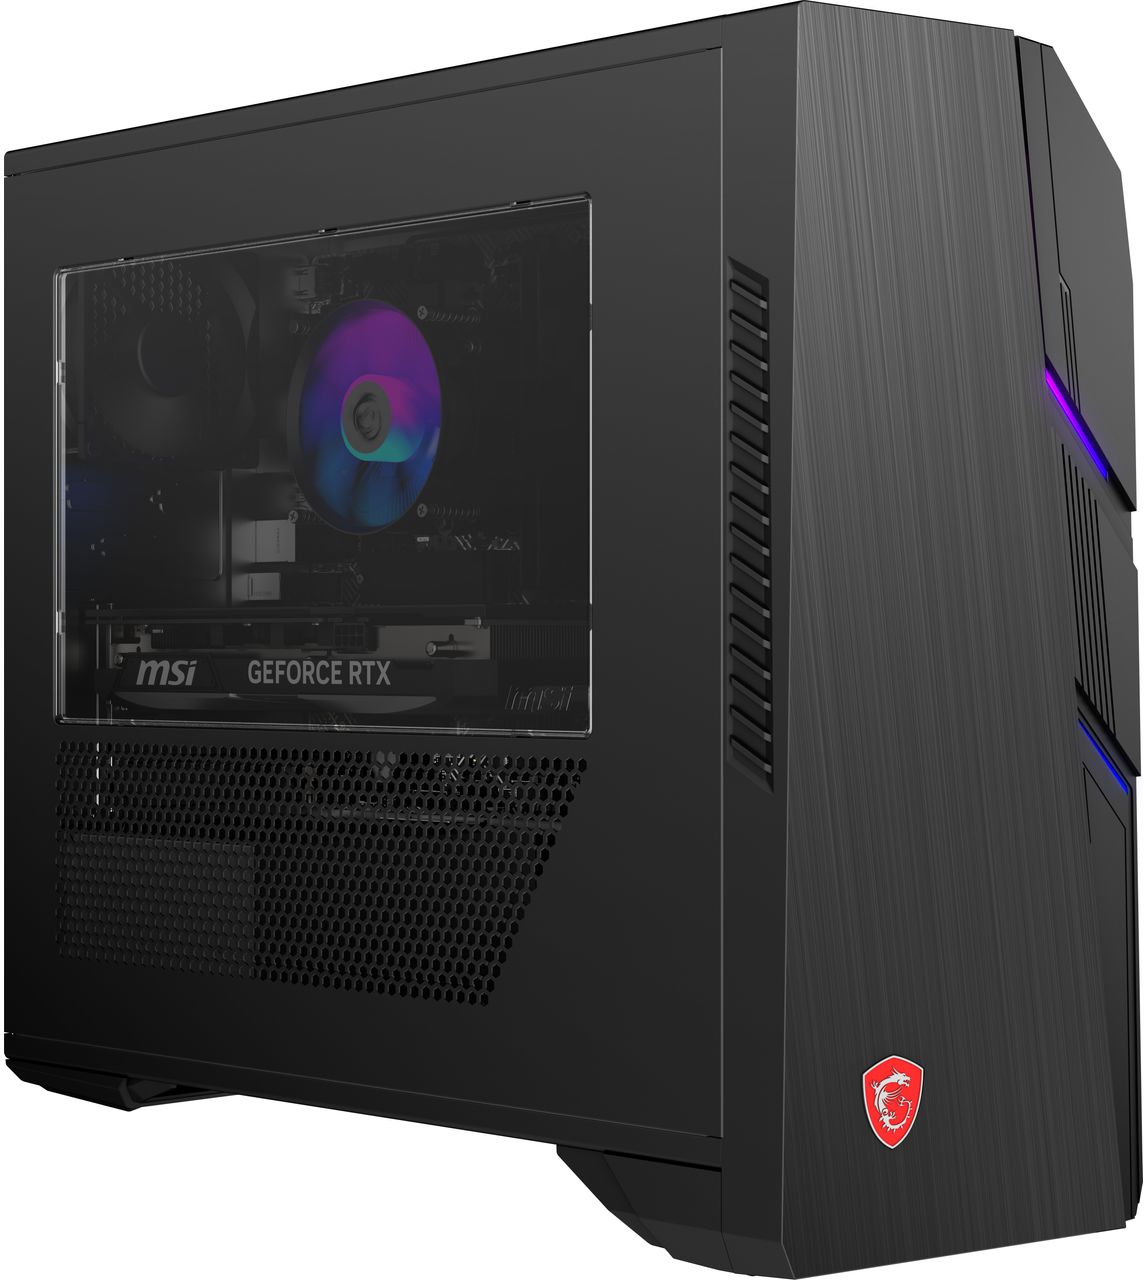 MSI is launching a line of 'Made in America' gaming desktops starting at  $799